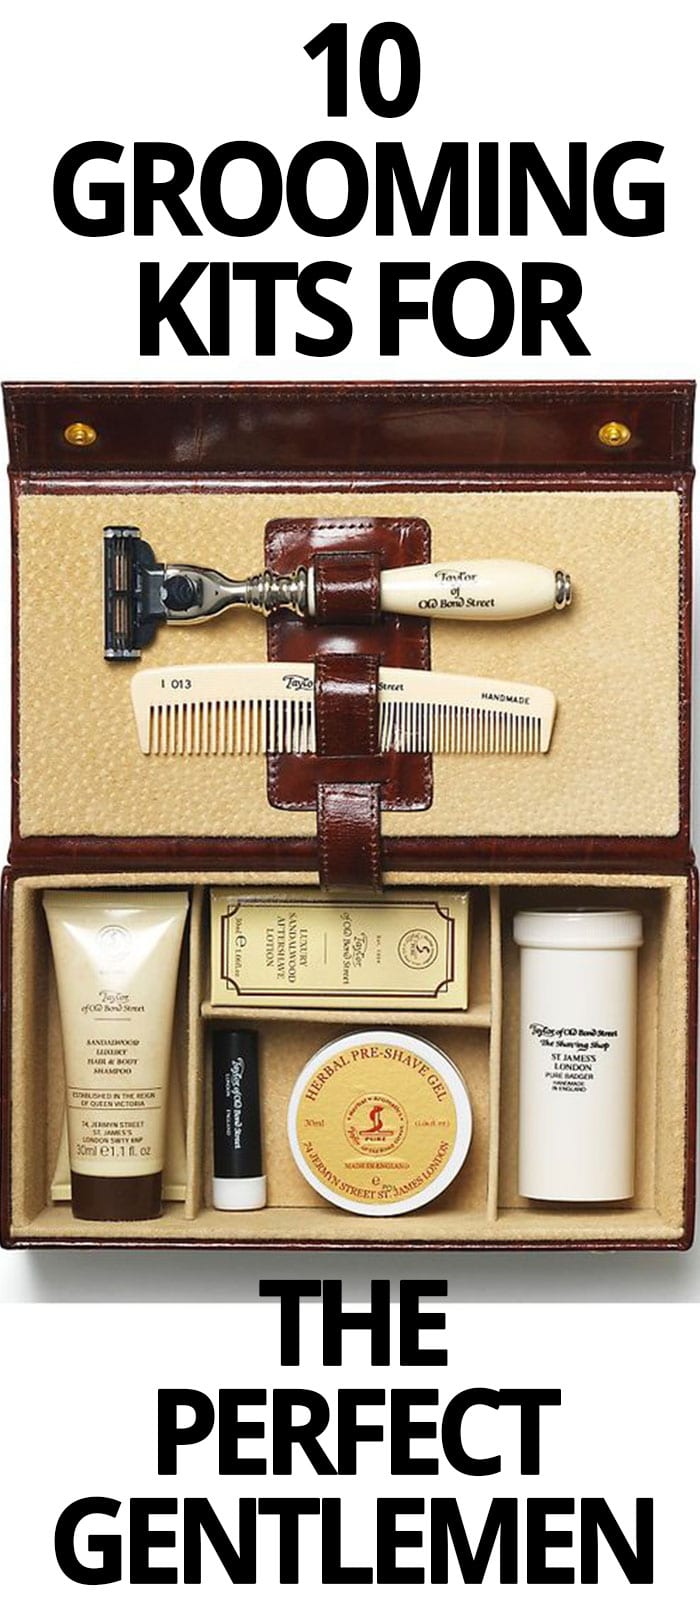 10-GROOMING-KITS-FOR-THE